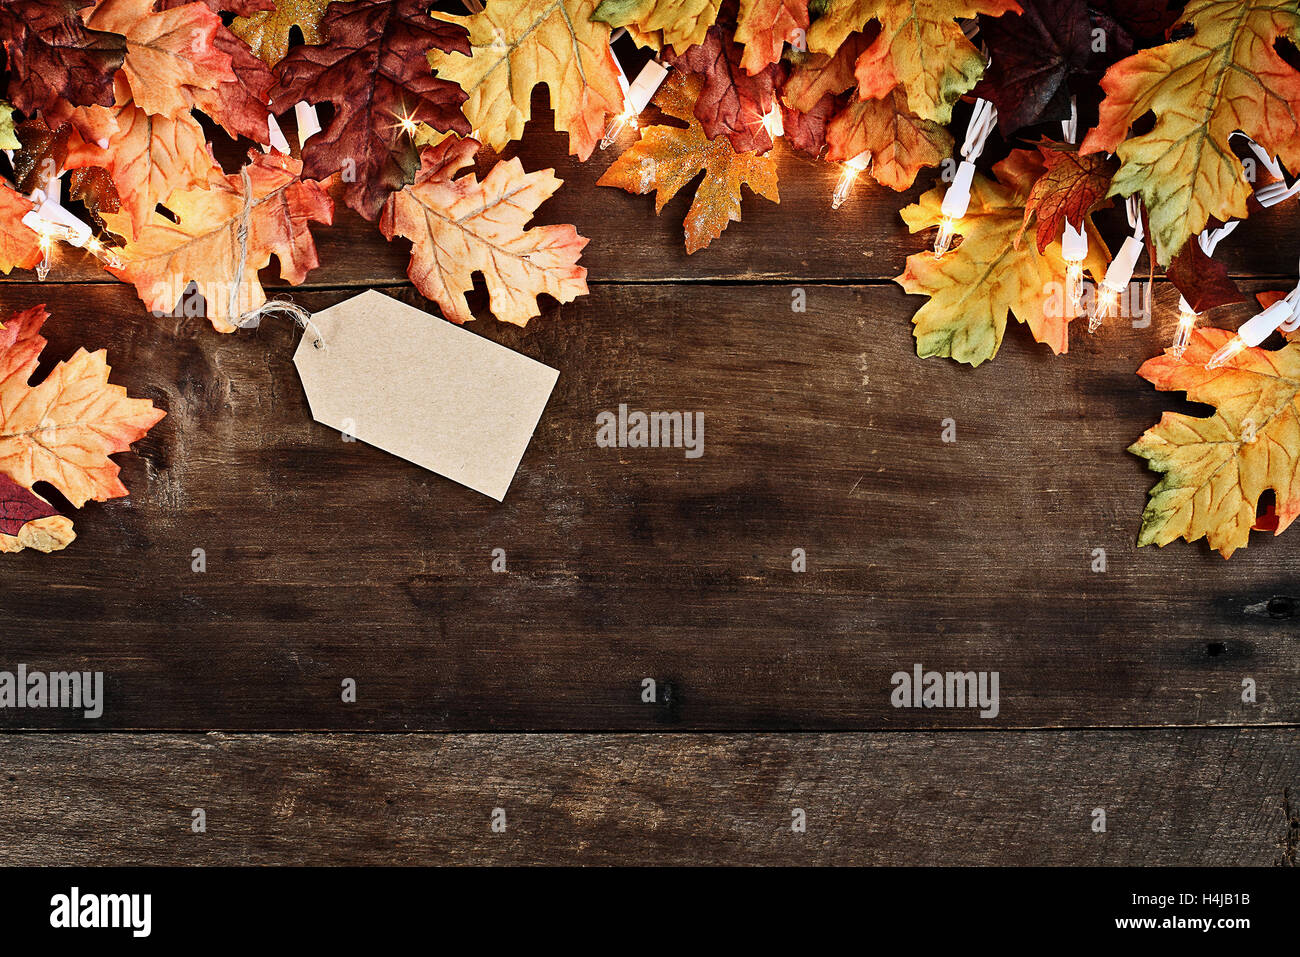 Rustic fall background of autumn leaves and decorative lights with empty tag for copy space over a rustic background of wood. Stock Photo